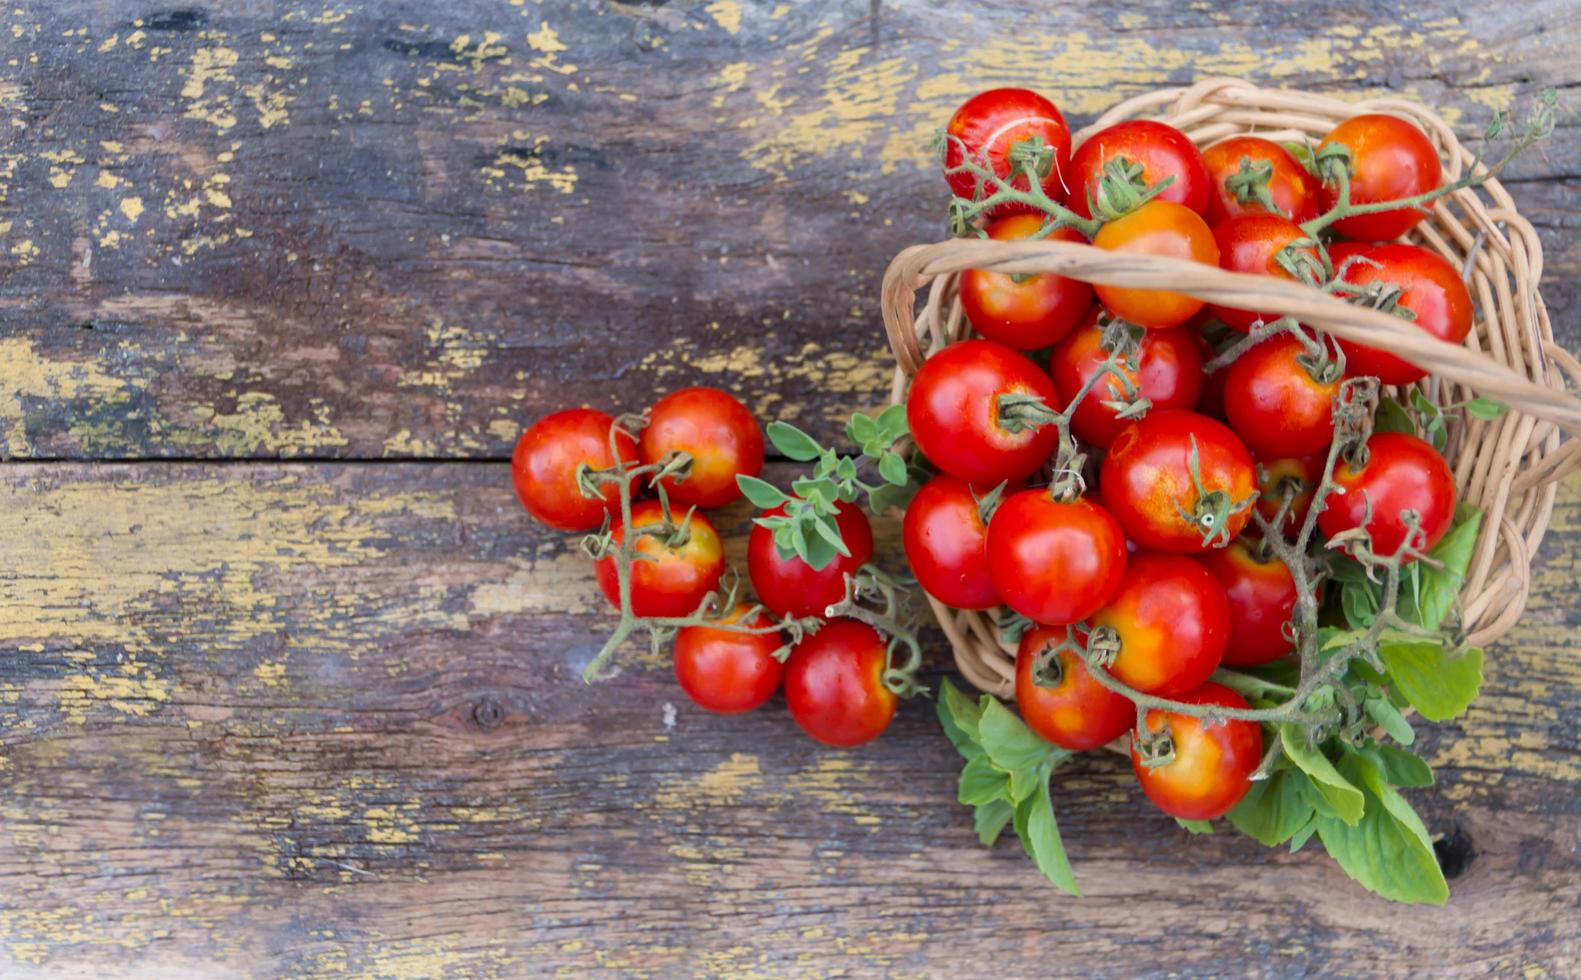 rustic kitchen background with cherry tomatoes ru photo